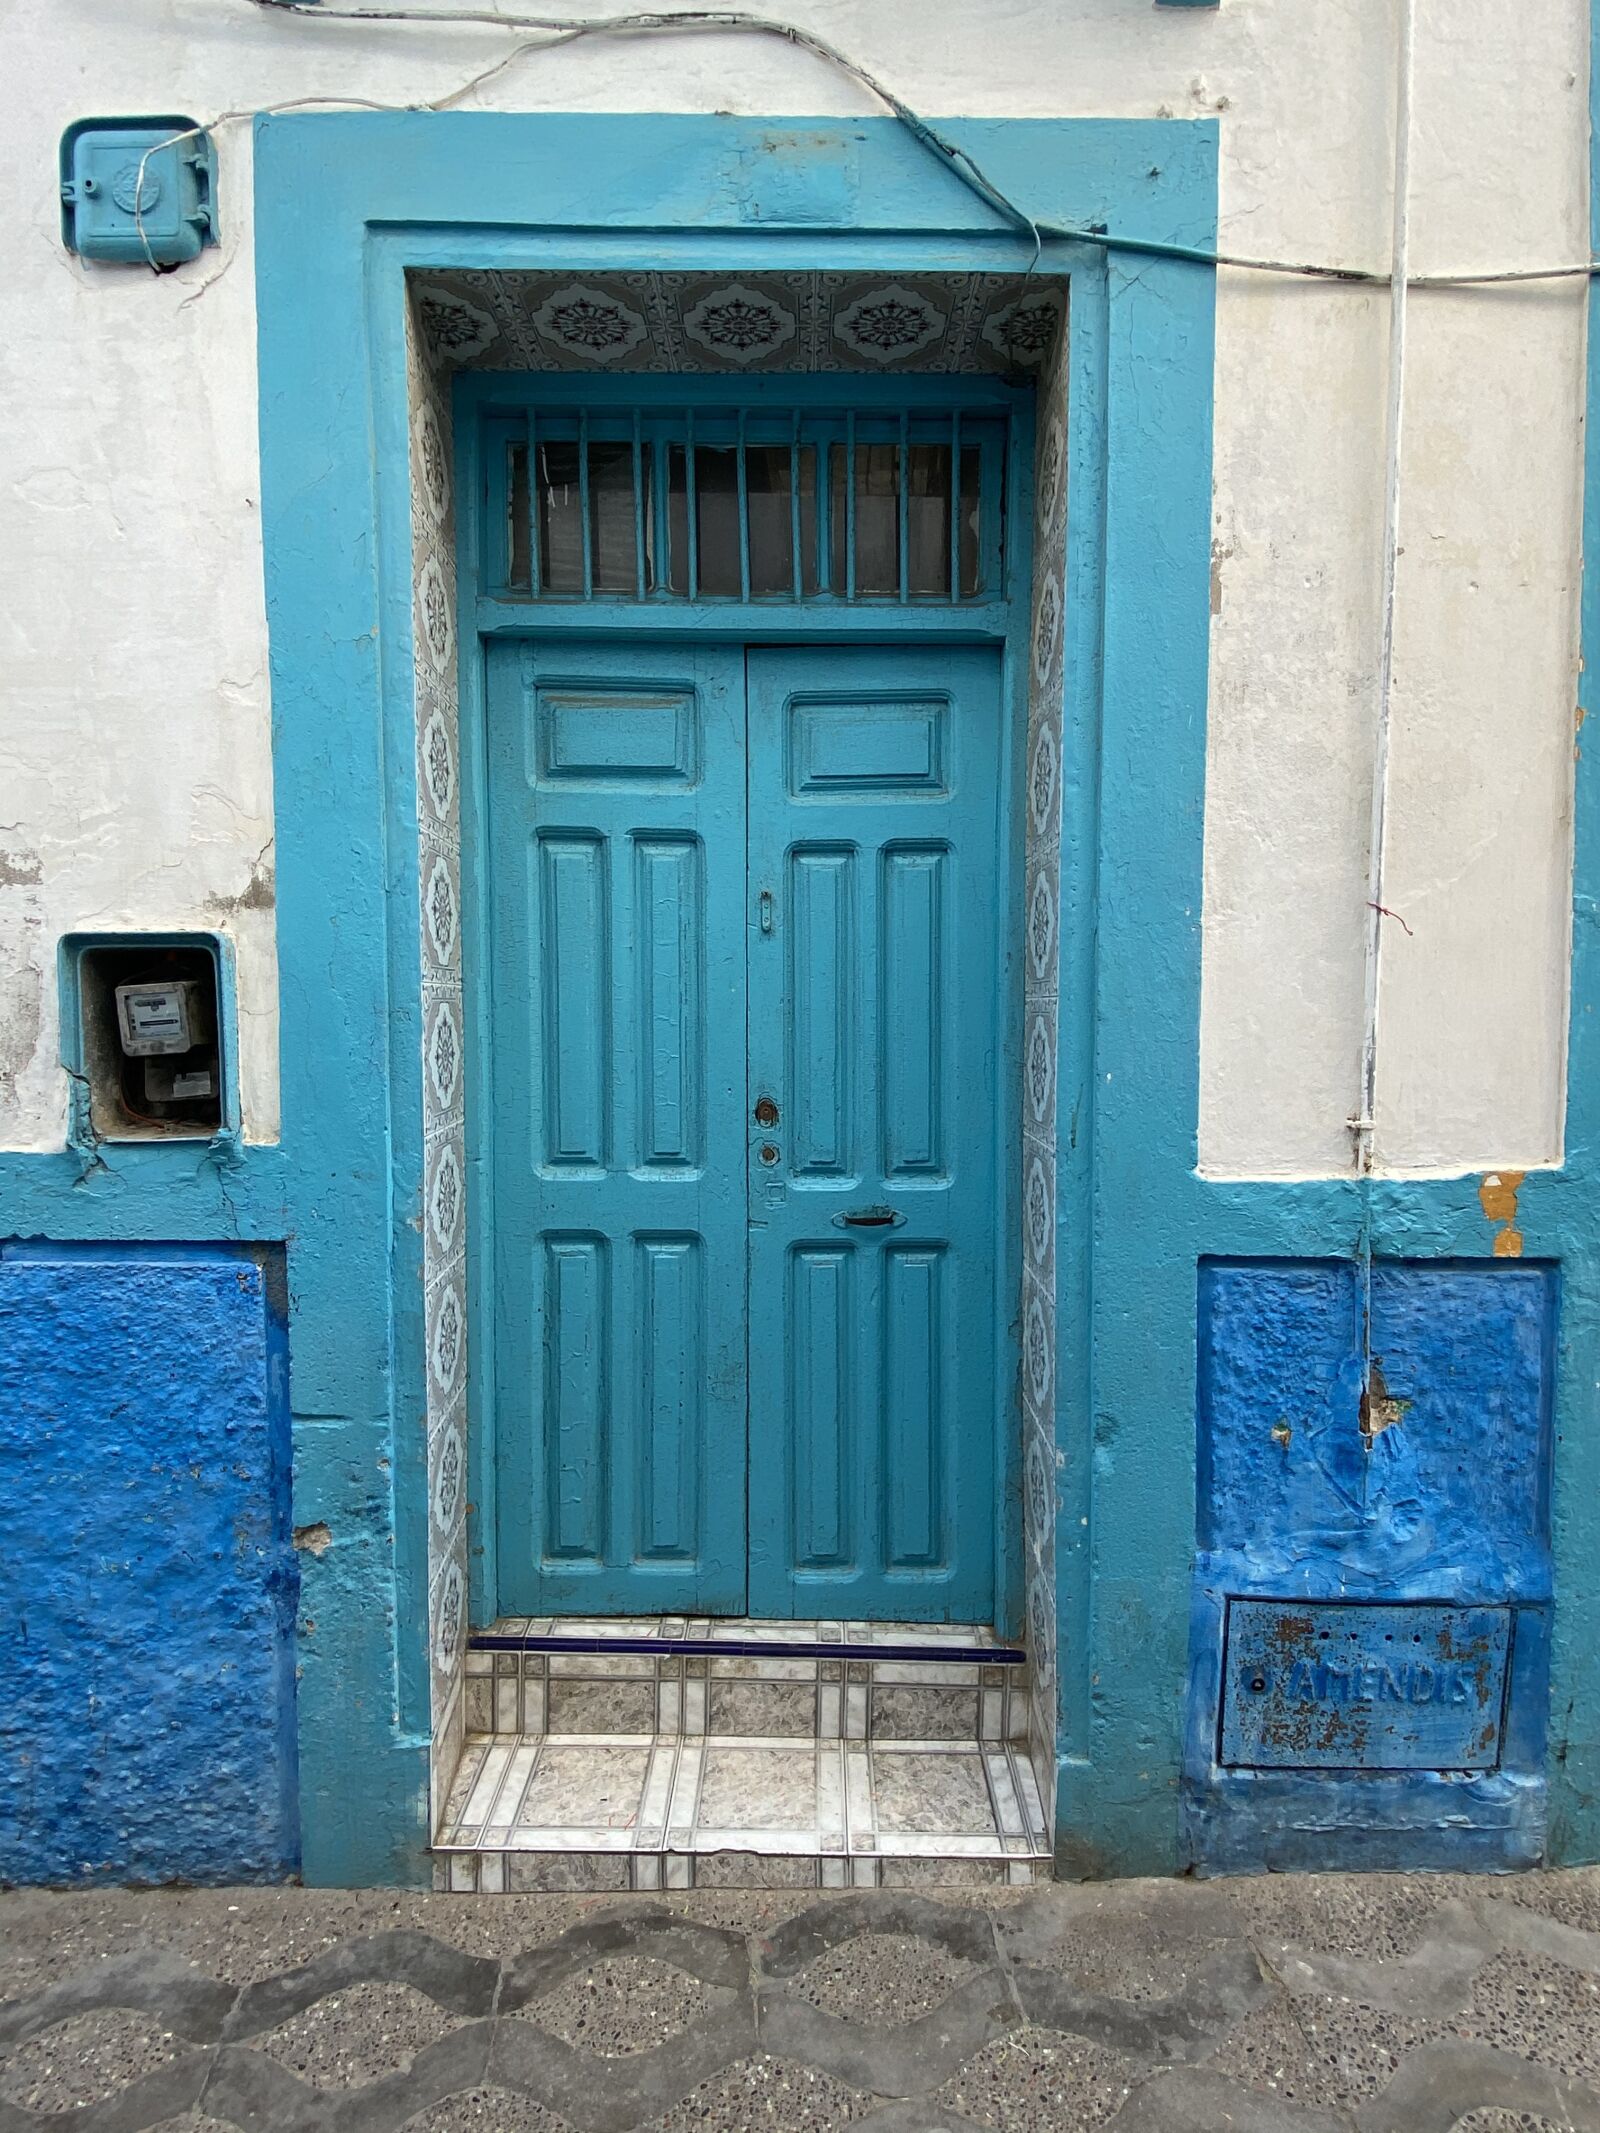 iPhone 11 Pro Max back triple camera 1.54mm f/2.4 sample photo. Morocco, door, architecture photography